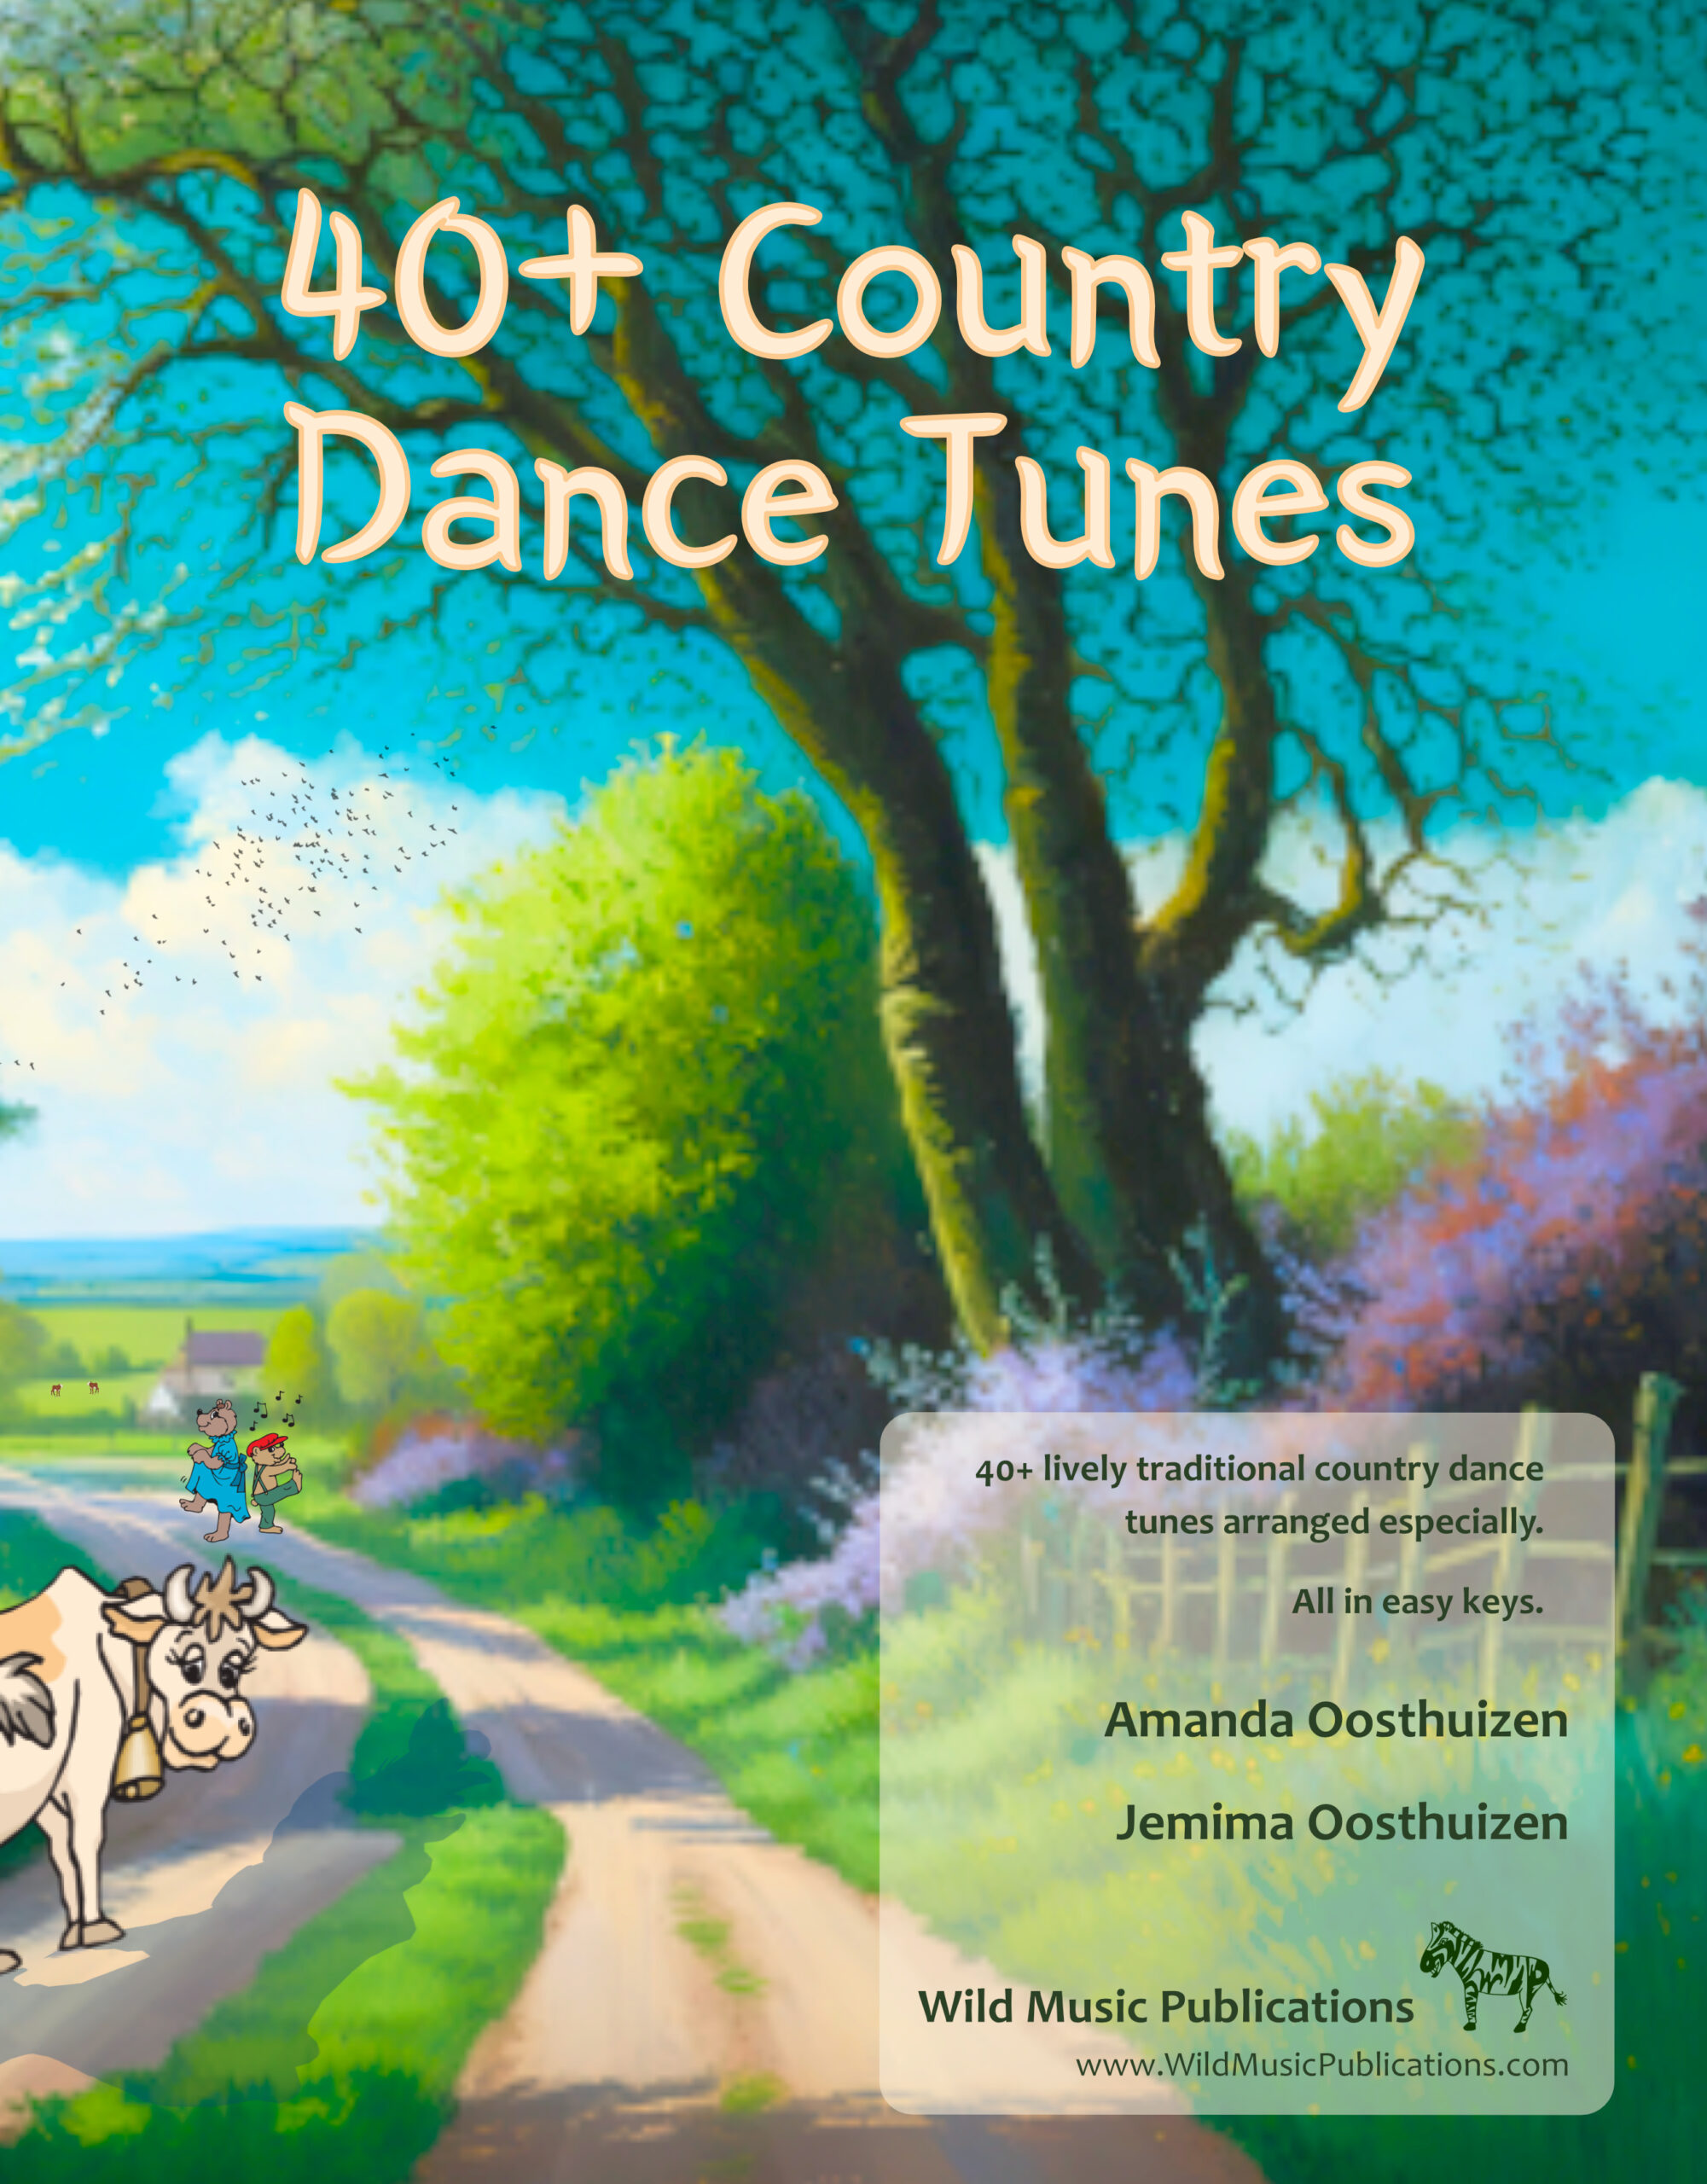 40+ Country Dance Tunes